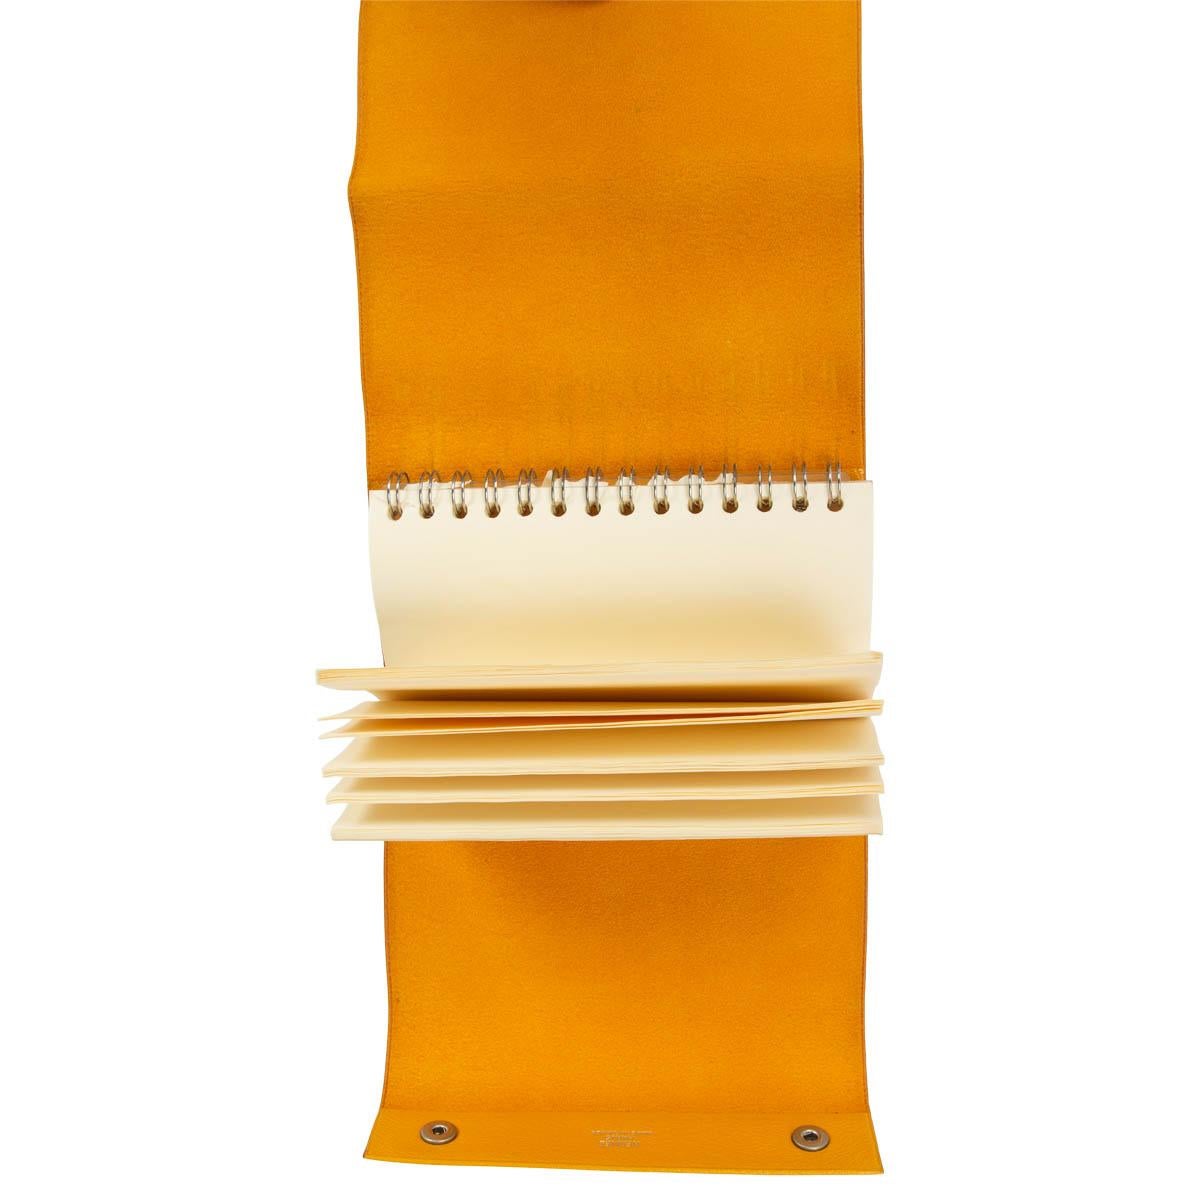 Women's HERMES Jaune yellow Mysore leather CAHIER ROULE Roll Notebook For Sale